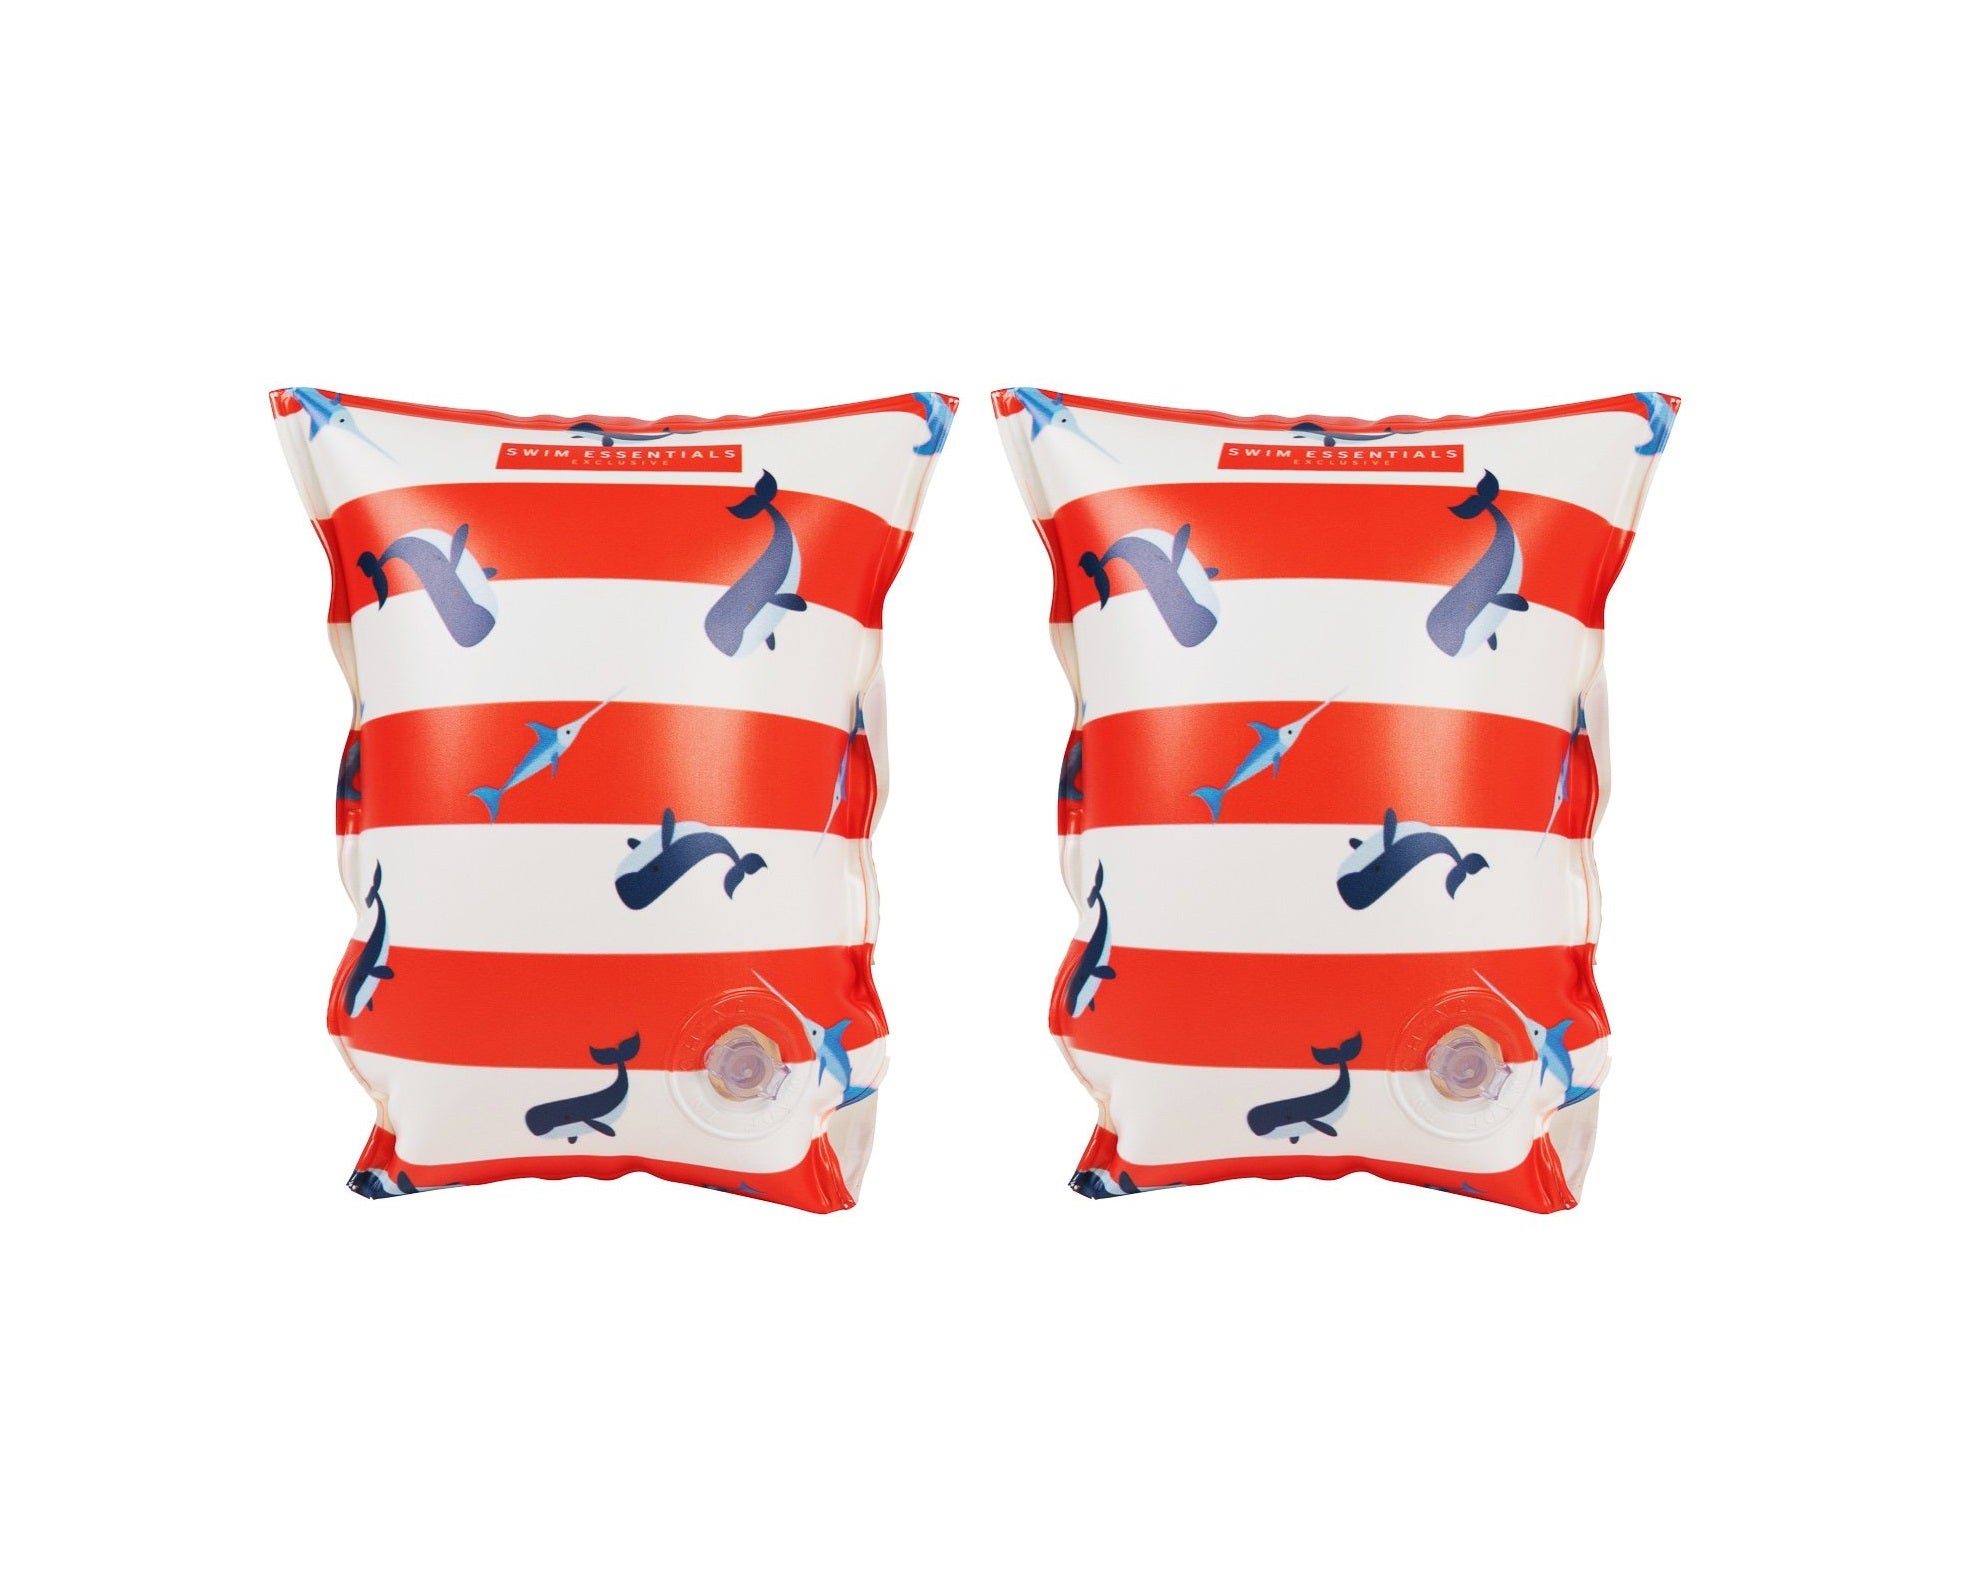 Swim Essentials - Swimming armbands whales 2 - 6 years